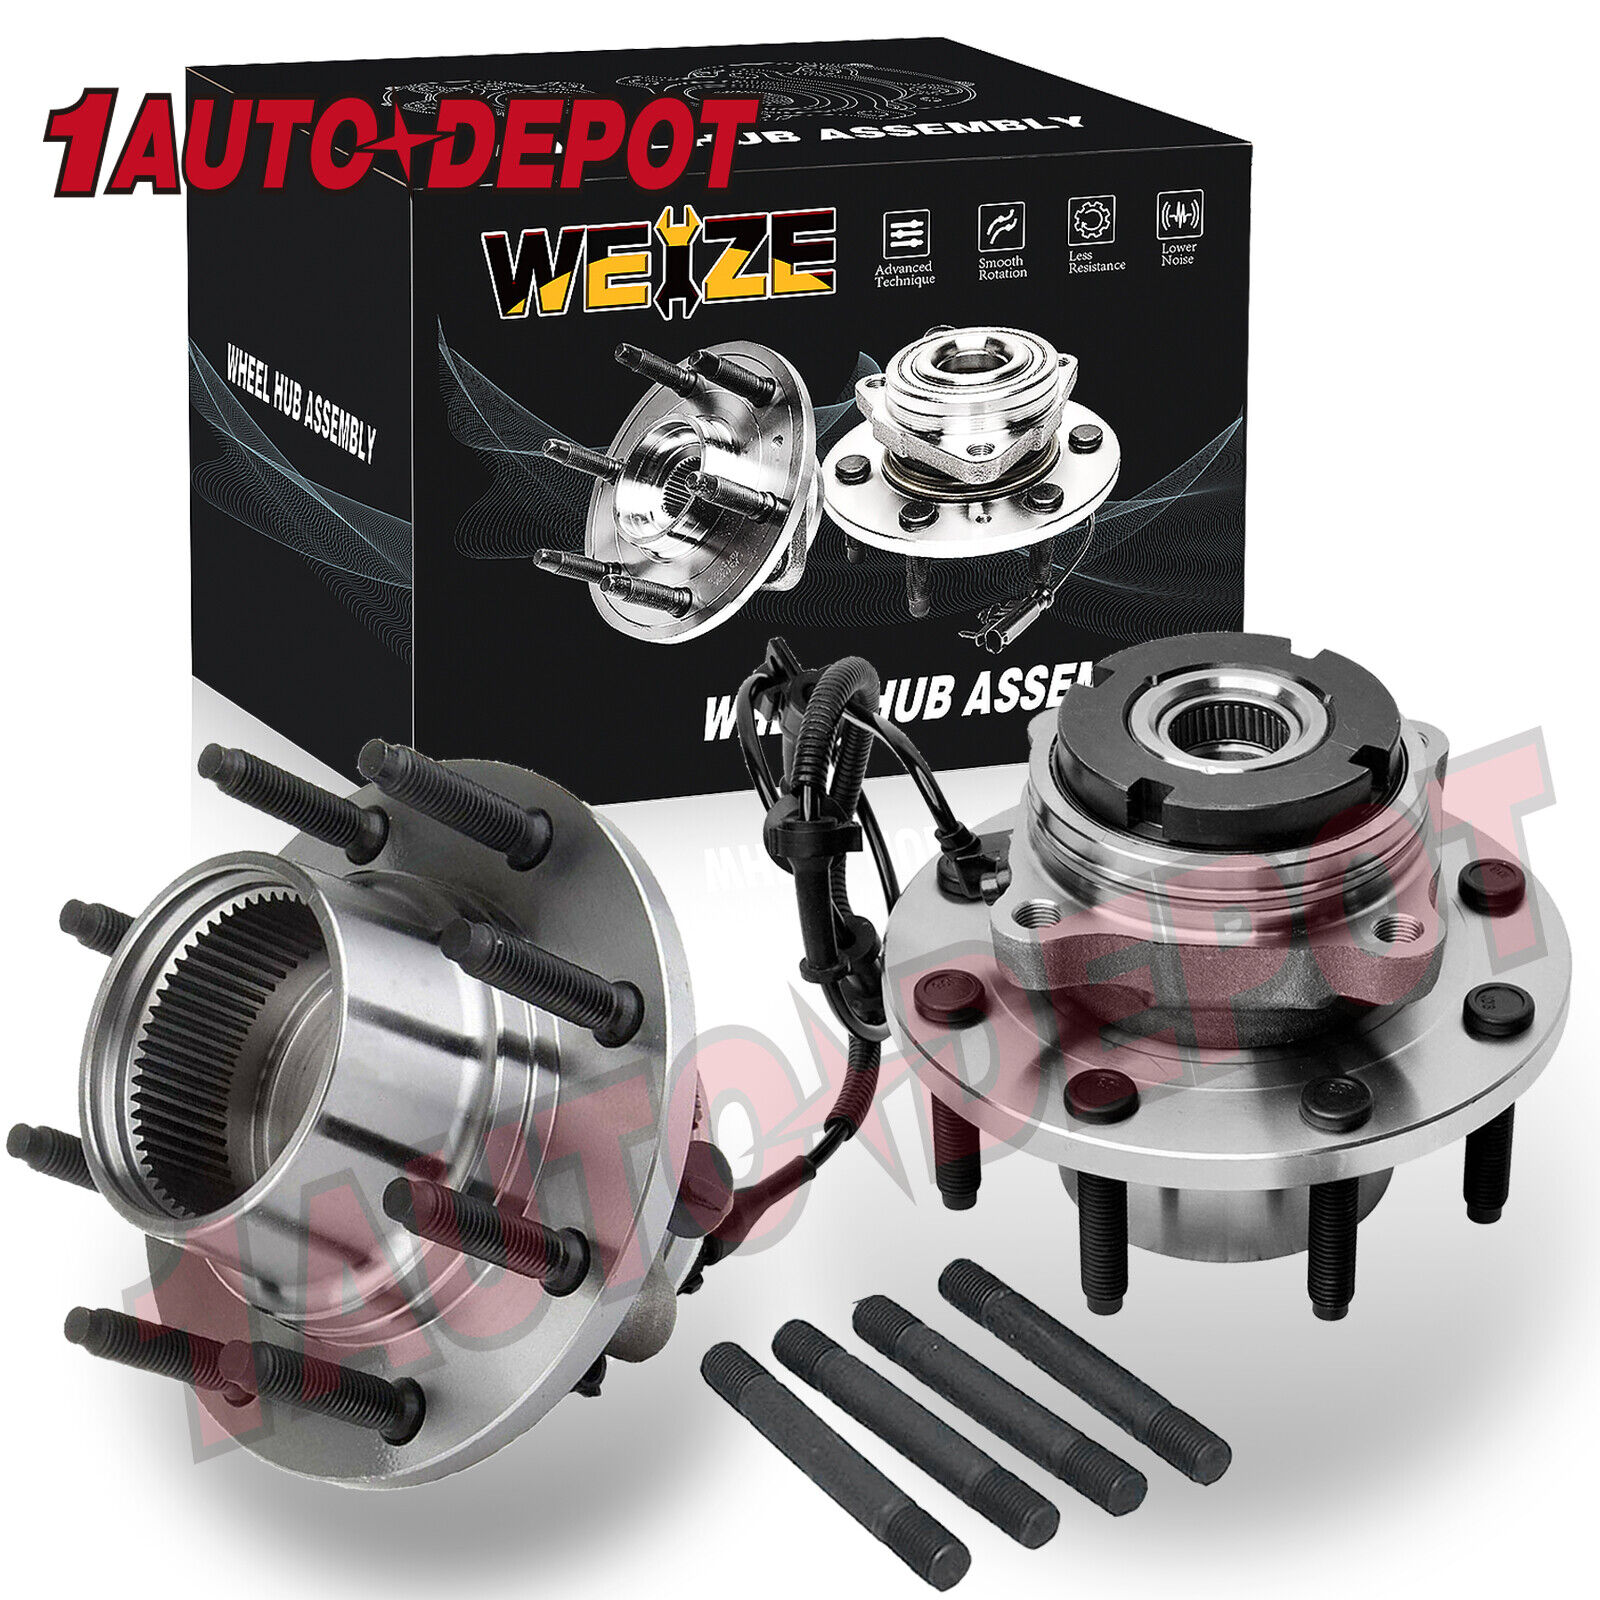 4WD Front Wheel Bearing and Hubs for Ford F-250 F-350 SD 1999-2004 Excursion x 2